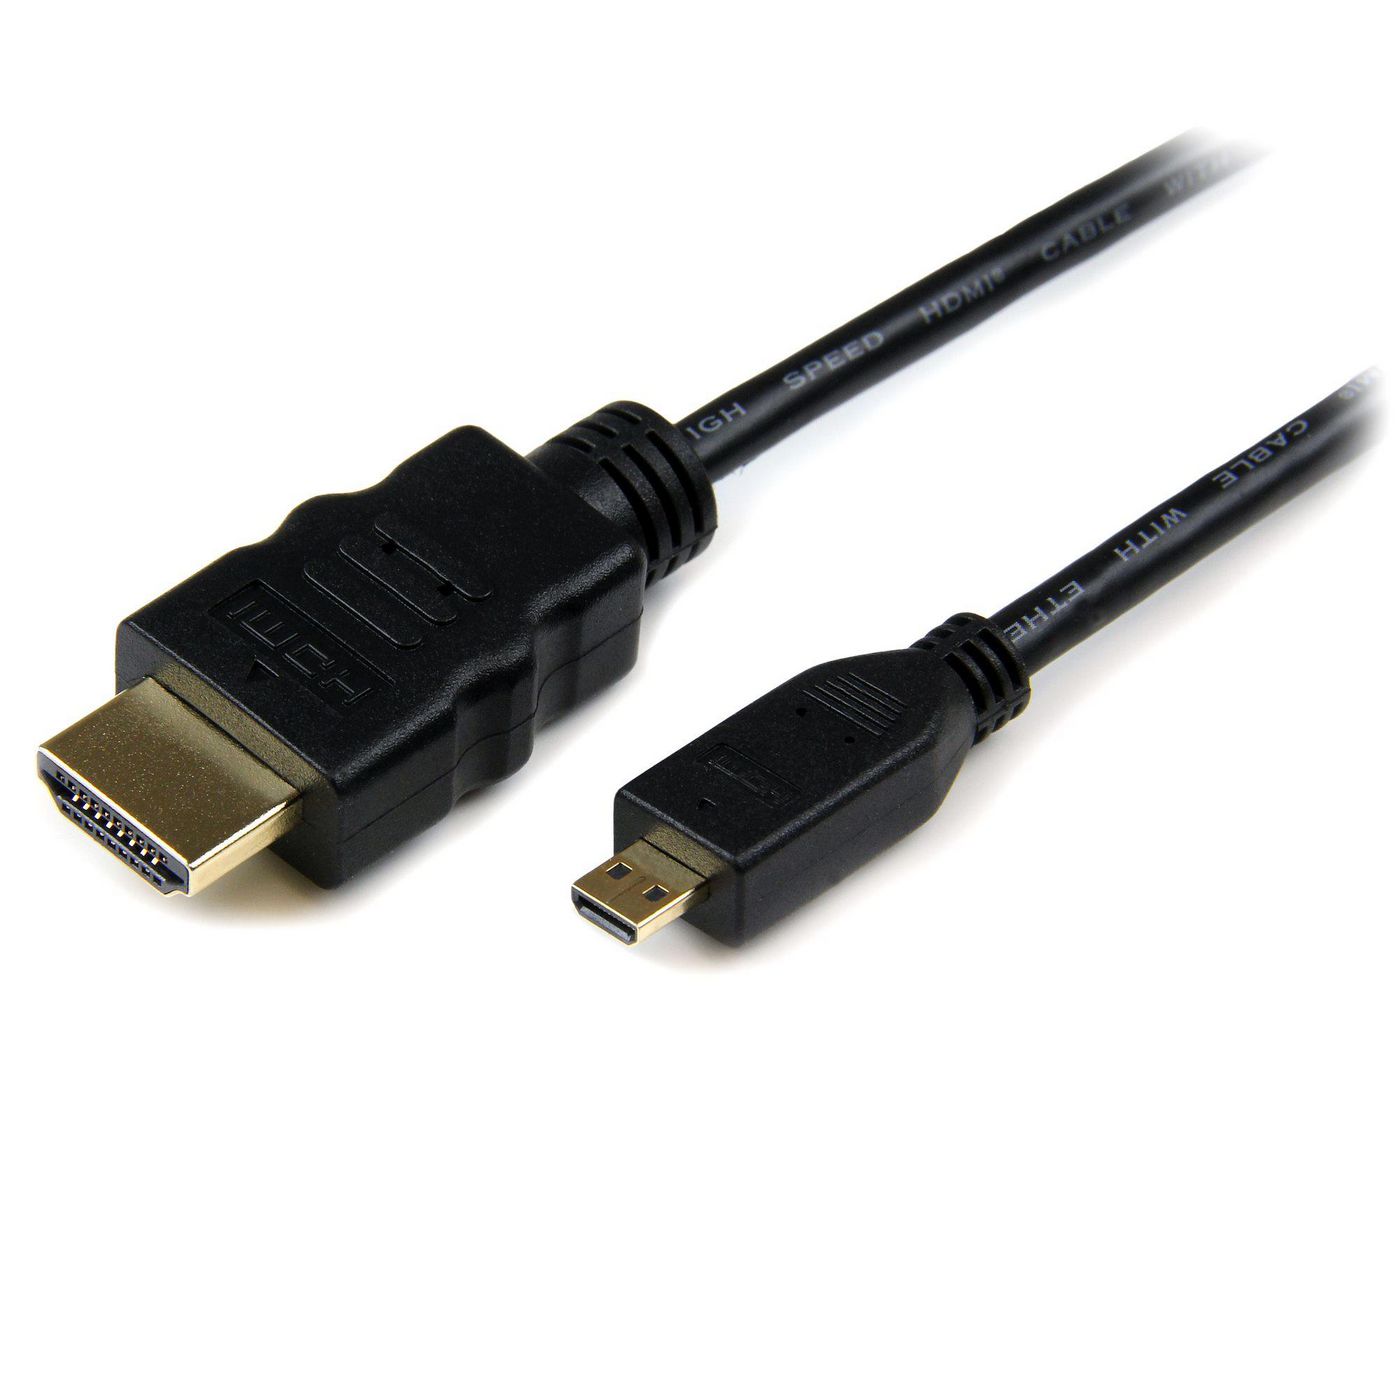 StarTechcom HDADMM1M 1 M HDMI TO HDMI MICRO CABLE 